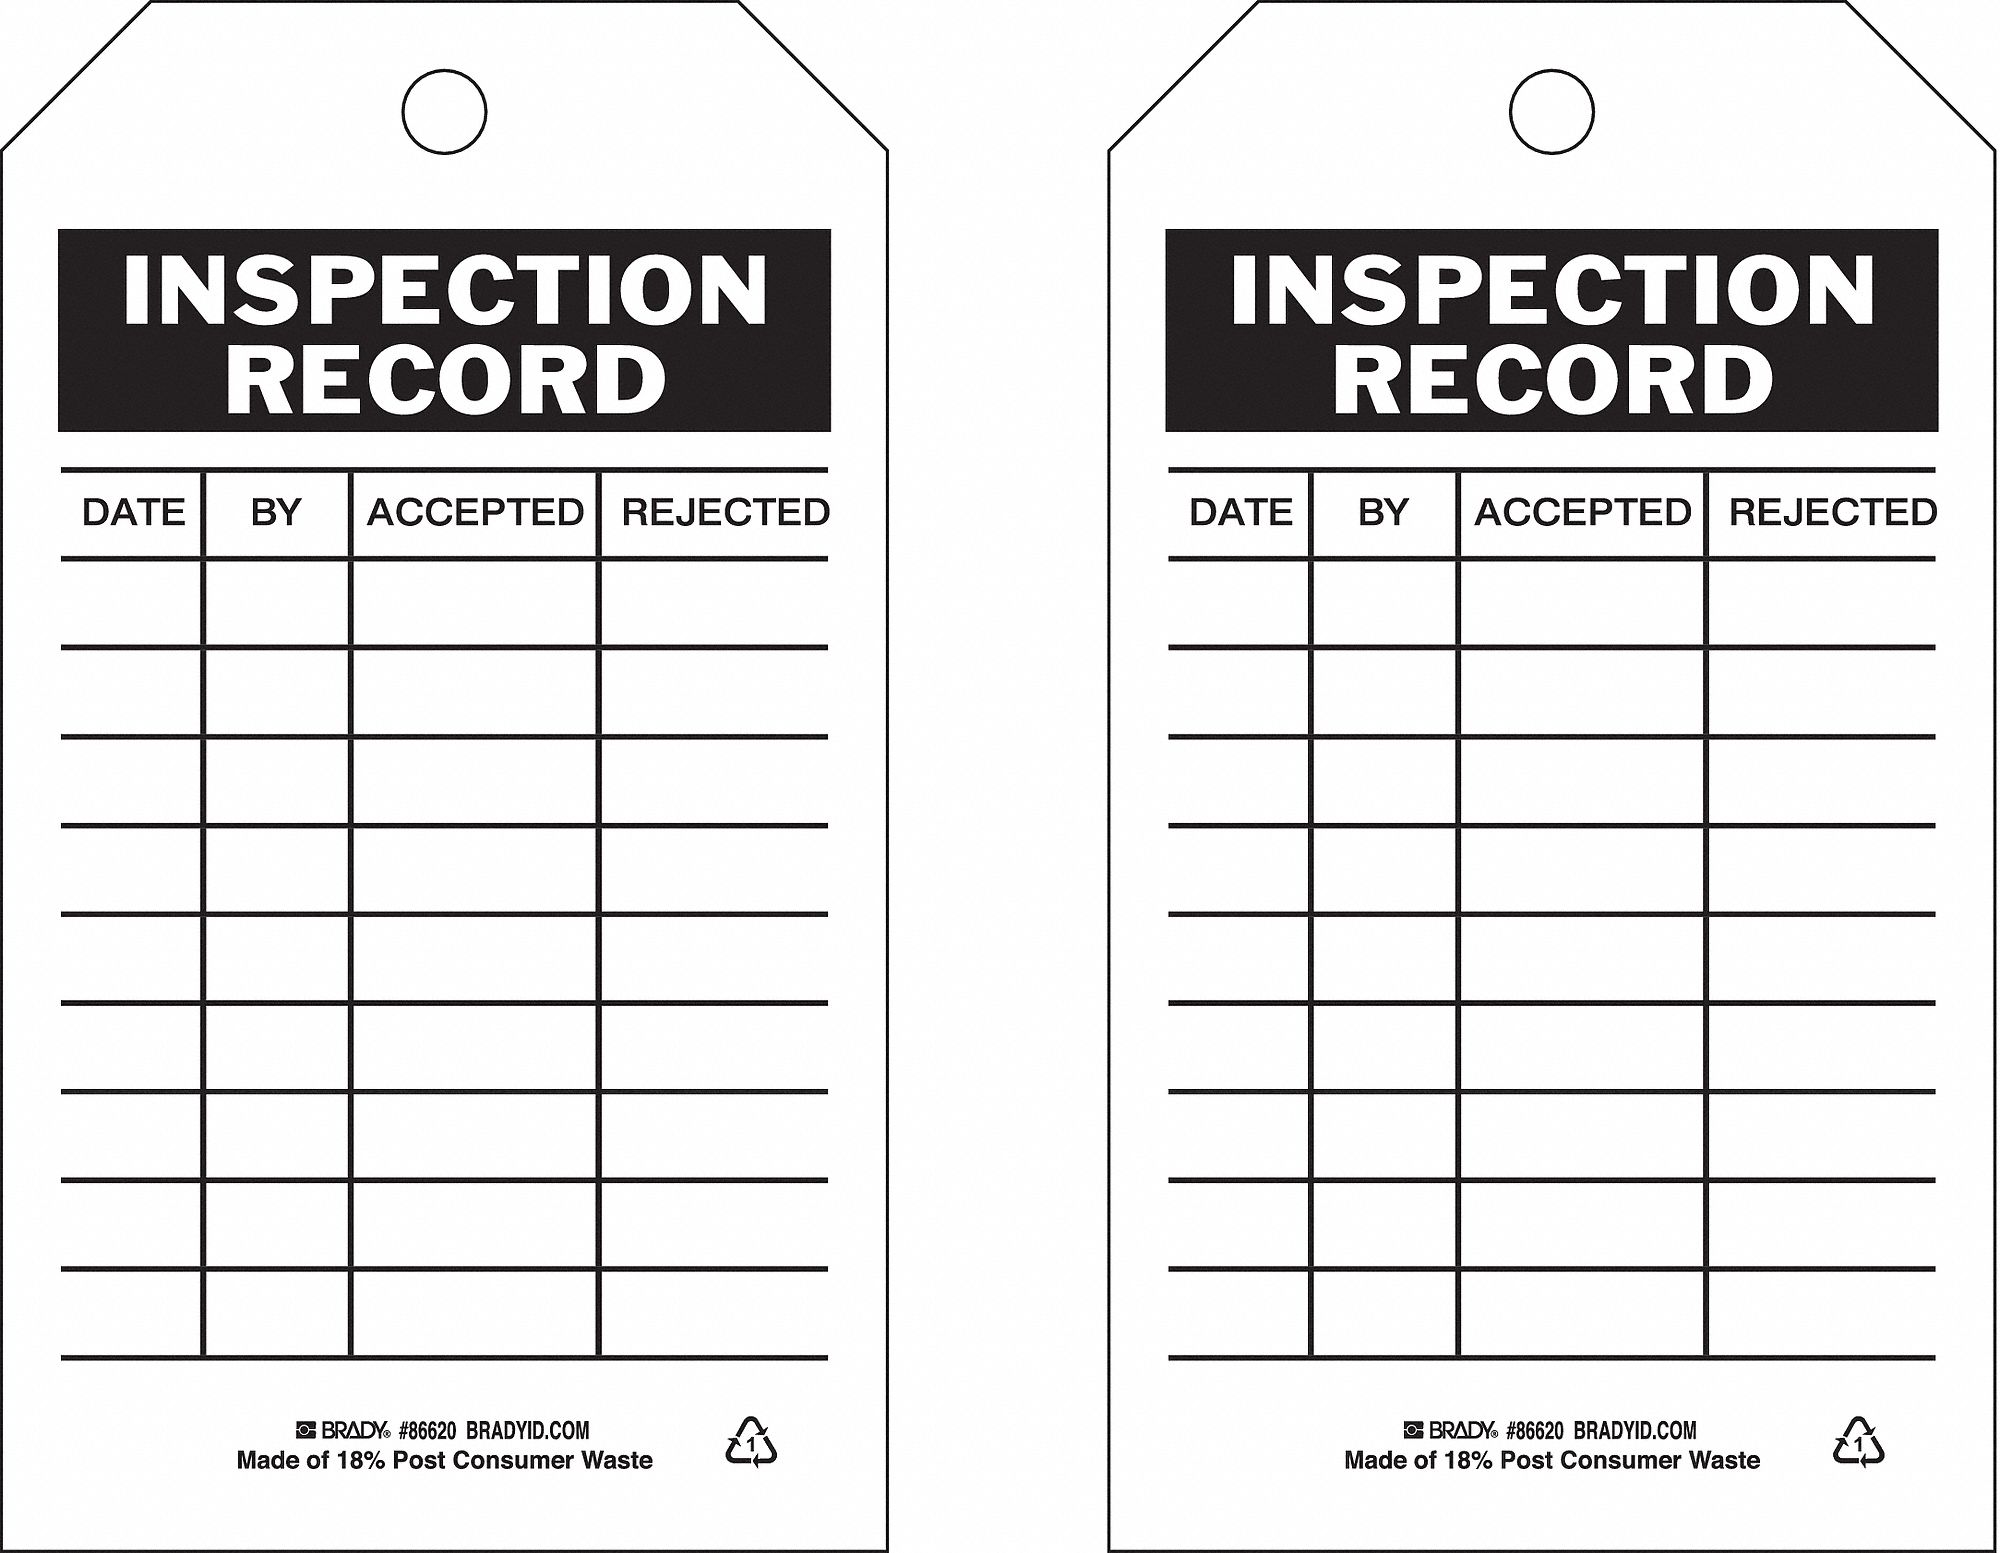 Economy PolyesterDate By Accepted Rejected Inspection Record Tag 5-3/4